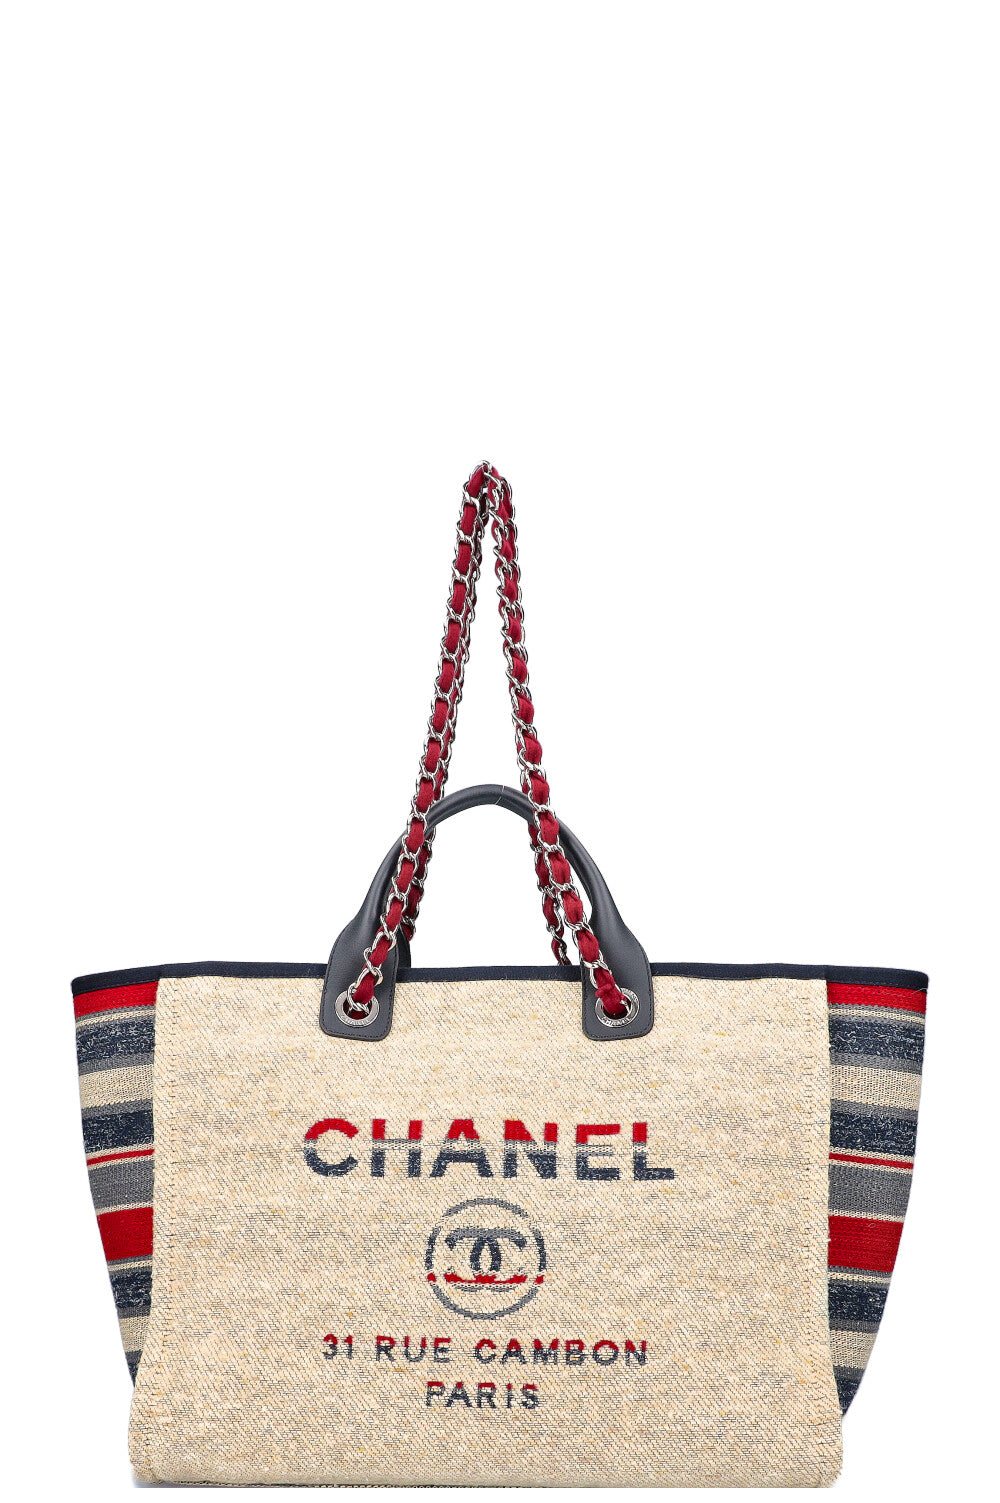 CHANEL Tote Red Bags & Handbags for Women